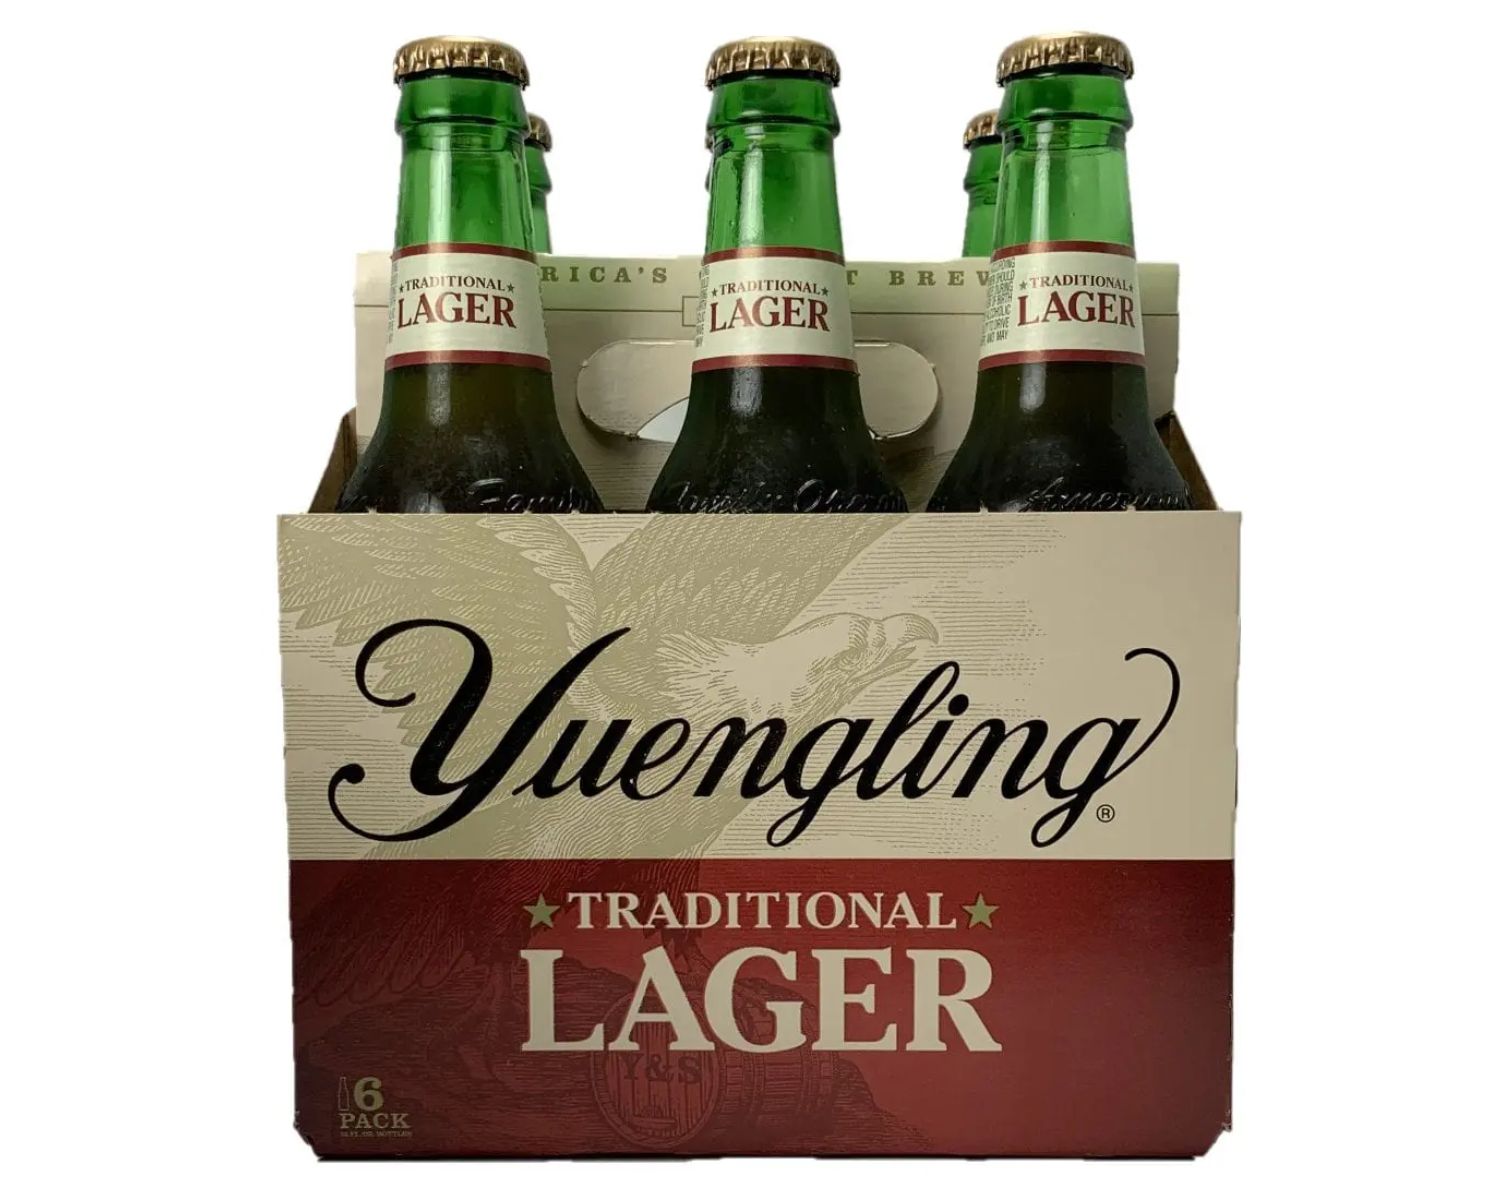 11-yuengling-lager-nutrition-facts